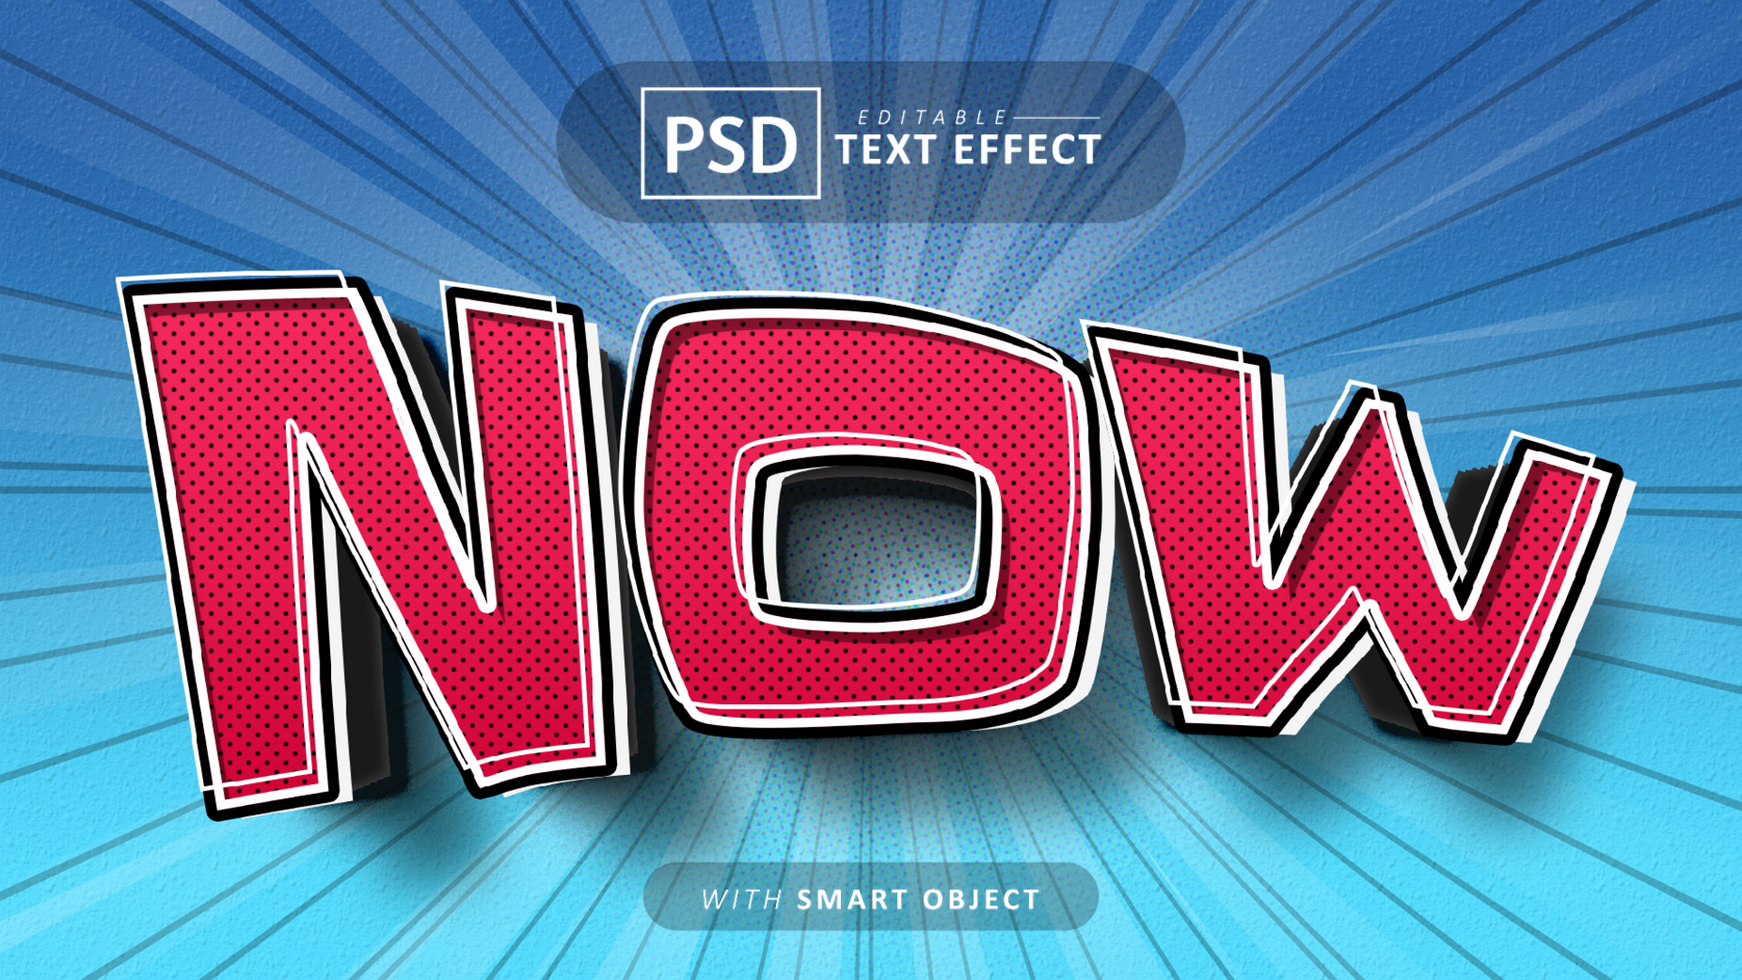 Now comic style text effect editable psd